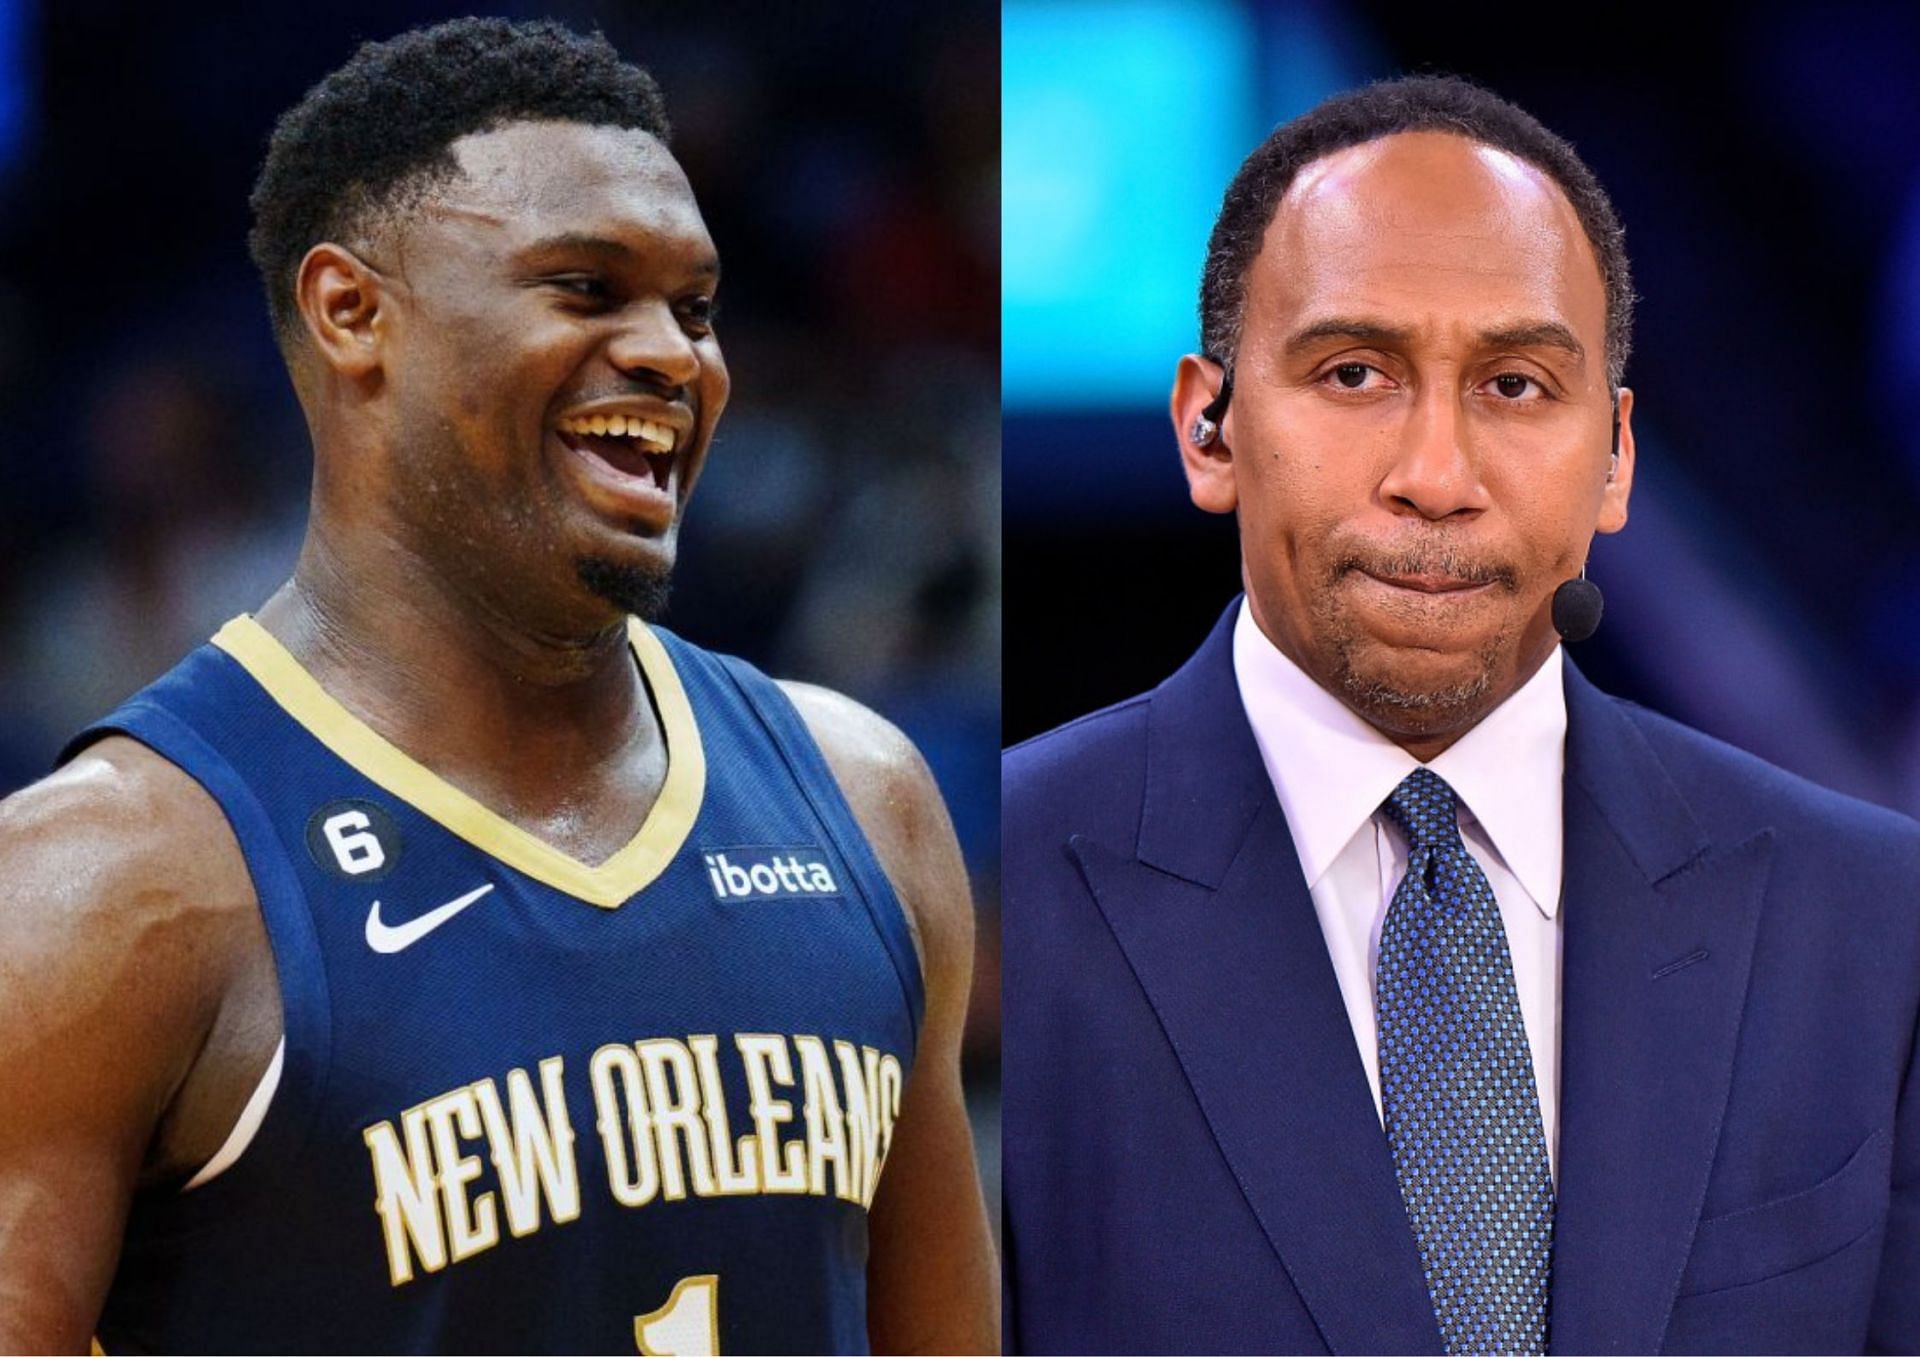 Stephen A. Smith ranted on Zion Williamson